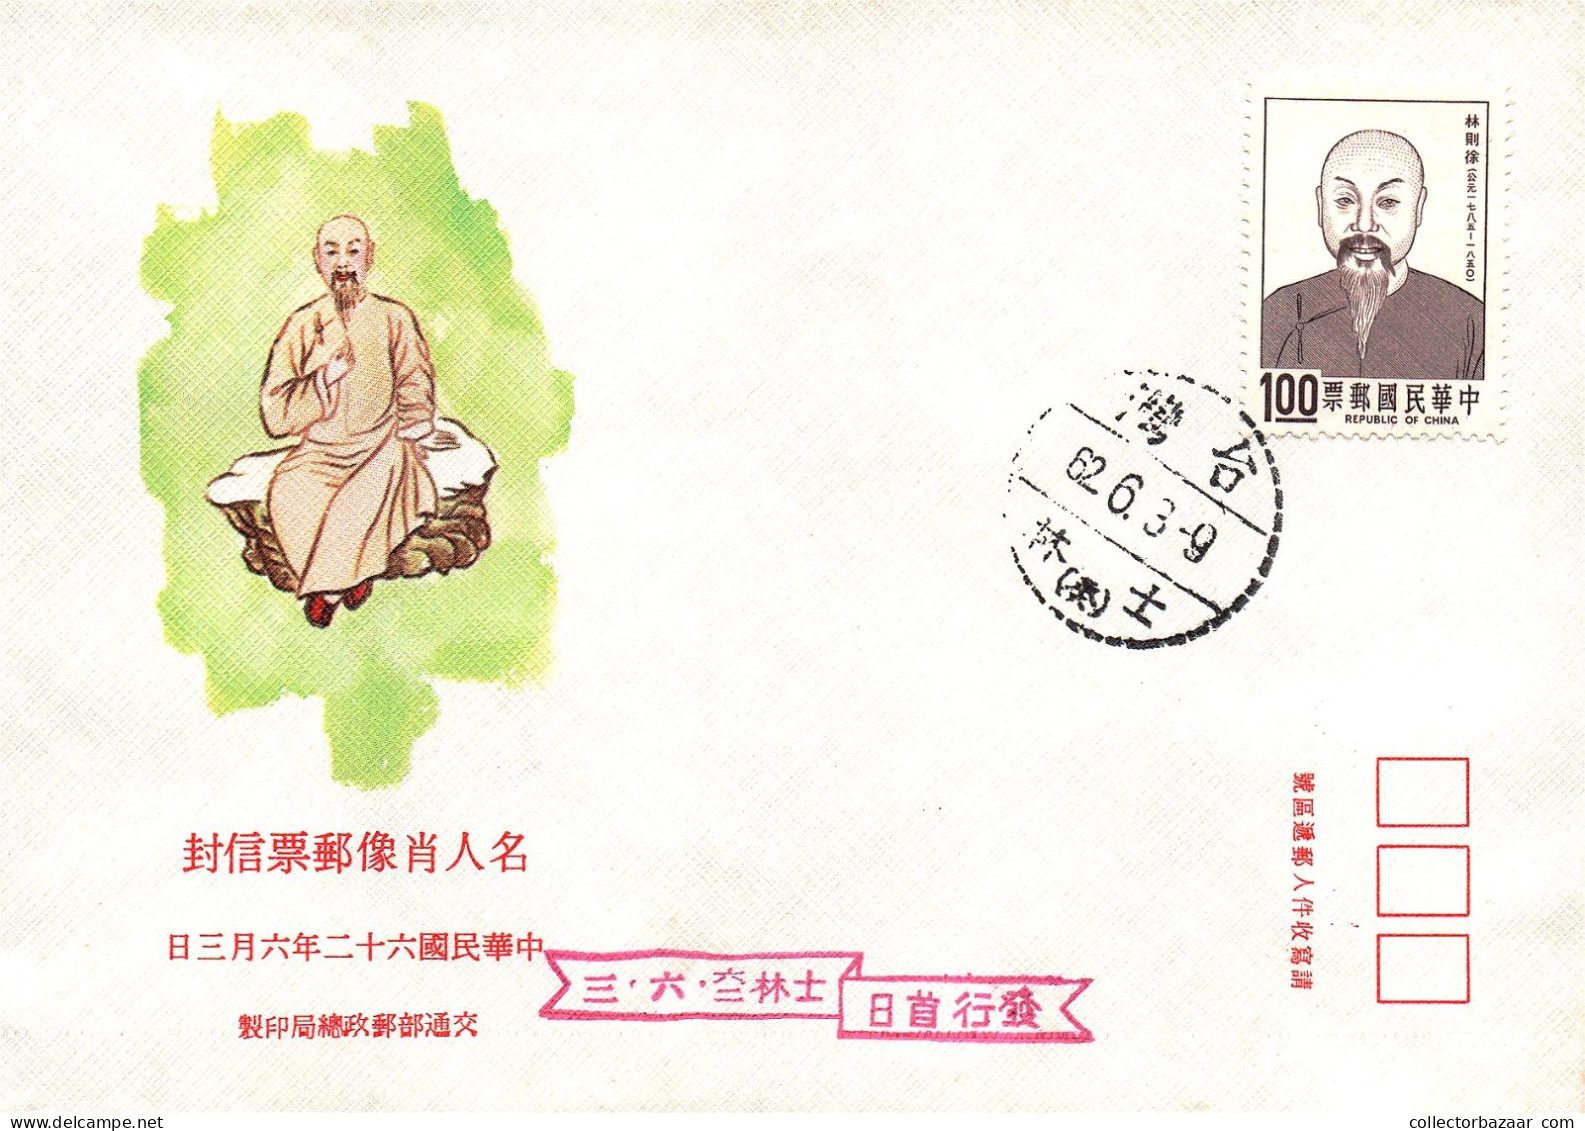 Taiwan Formosa Republic Of China FDC Art Paintings Drawings Portrait Traditional Costumes -1$ Stamps - FDC